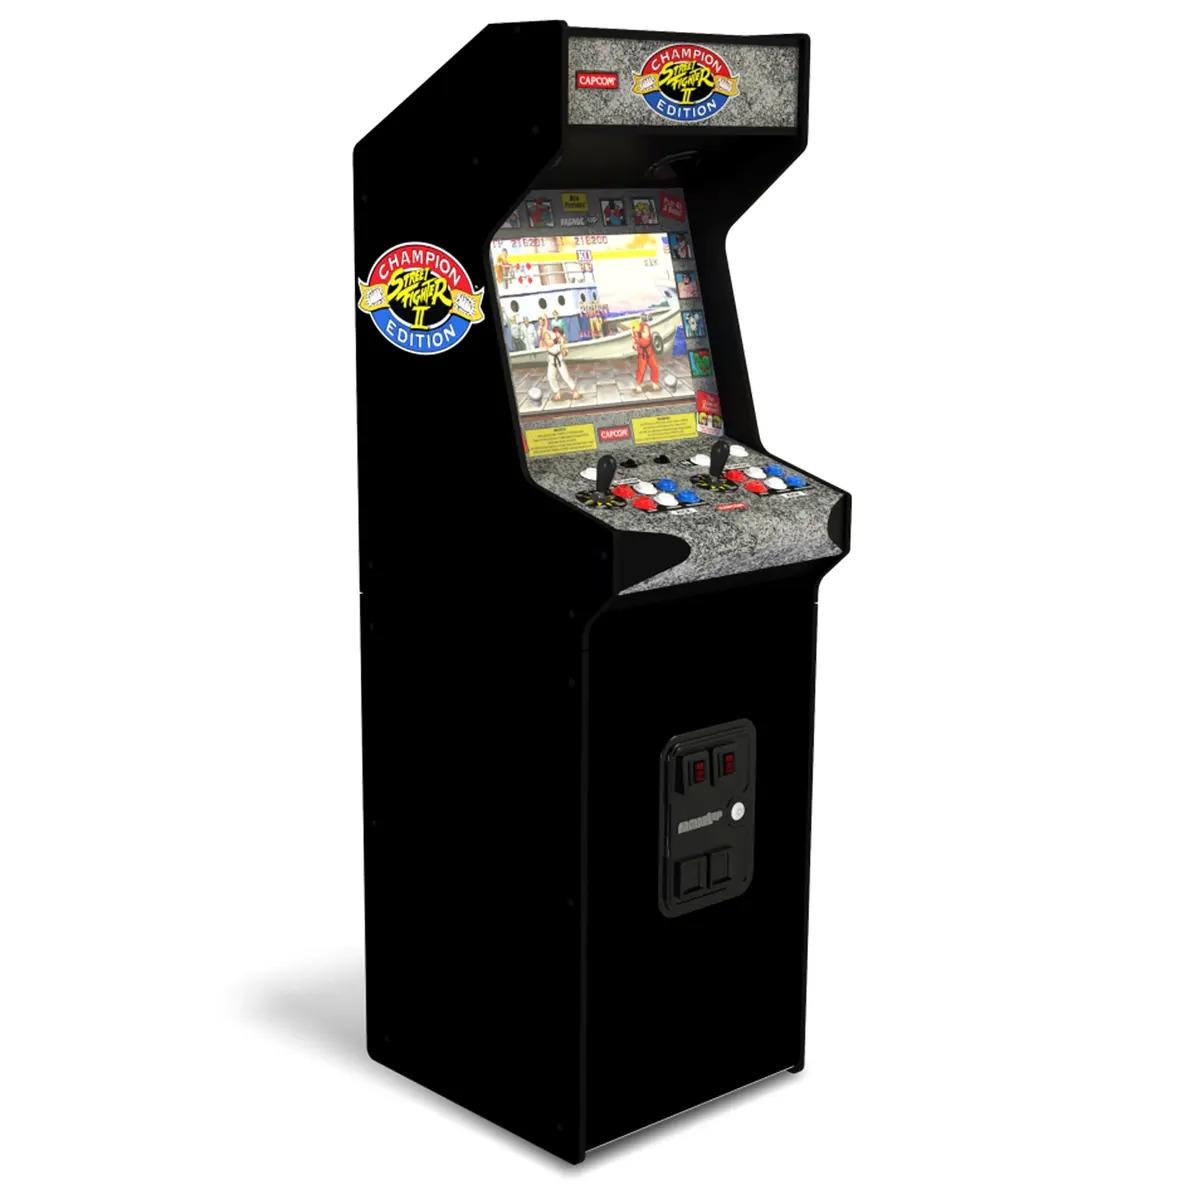 Arcade1Up Street Fighter II CE HS-5 Cabinet Arcade Machine for $299.99 Shipped